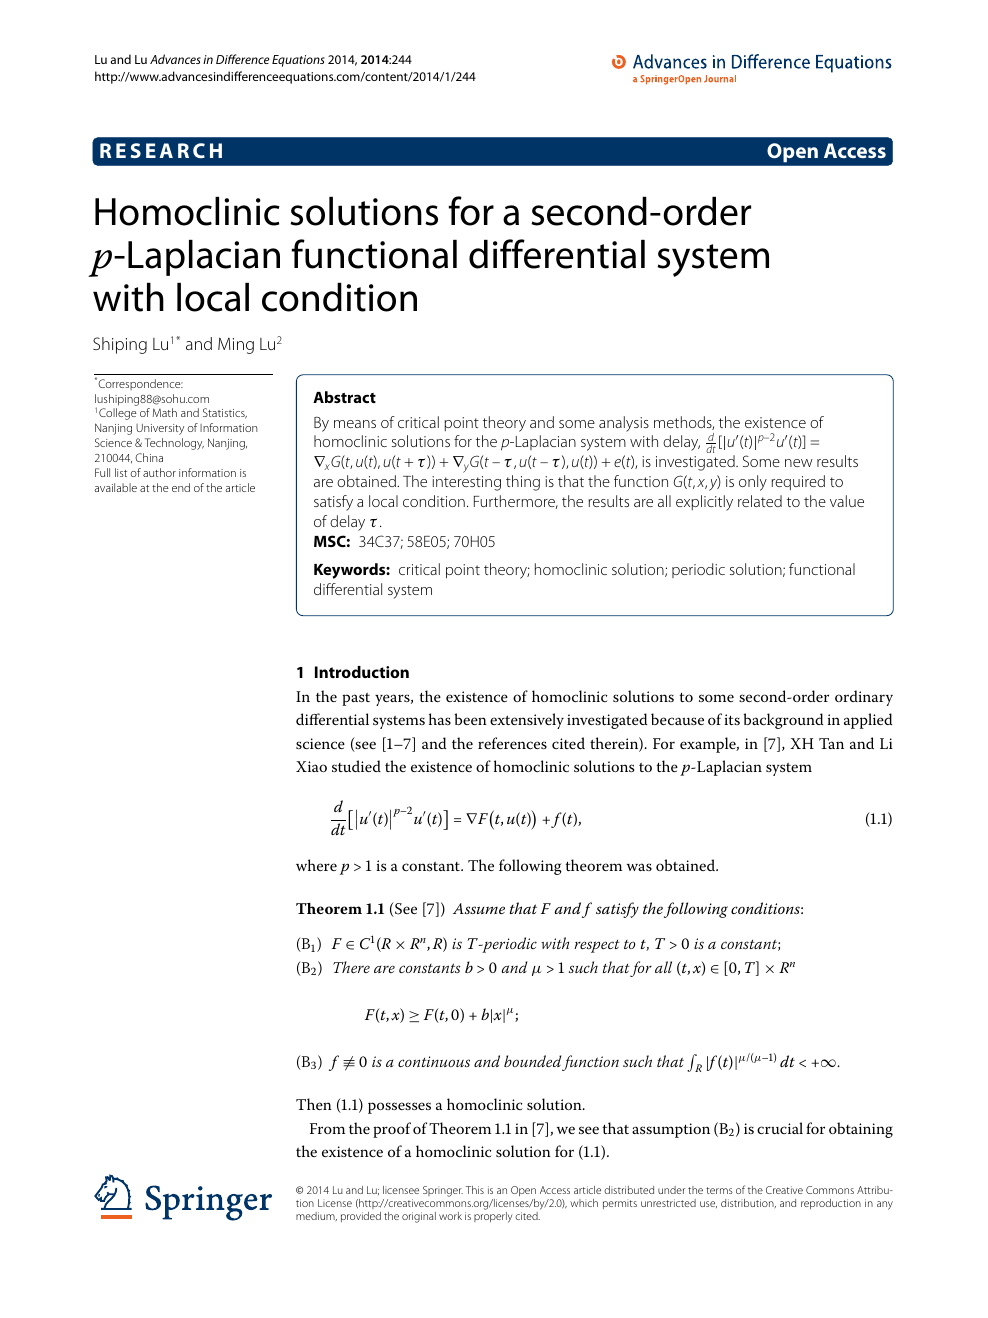 Homoclinic Solutions For A Second Order P Laplacian Functional Differential System With Local Condition Topic Of Research Paper In Mathematics Download Scholarly Article Pdf And Read For Free On Cyberleninka Open Science Hub